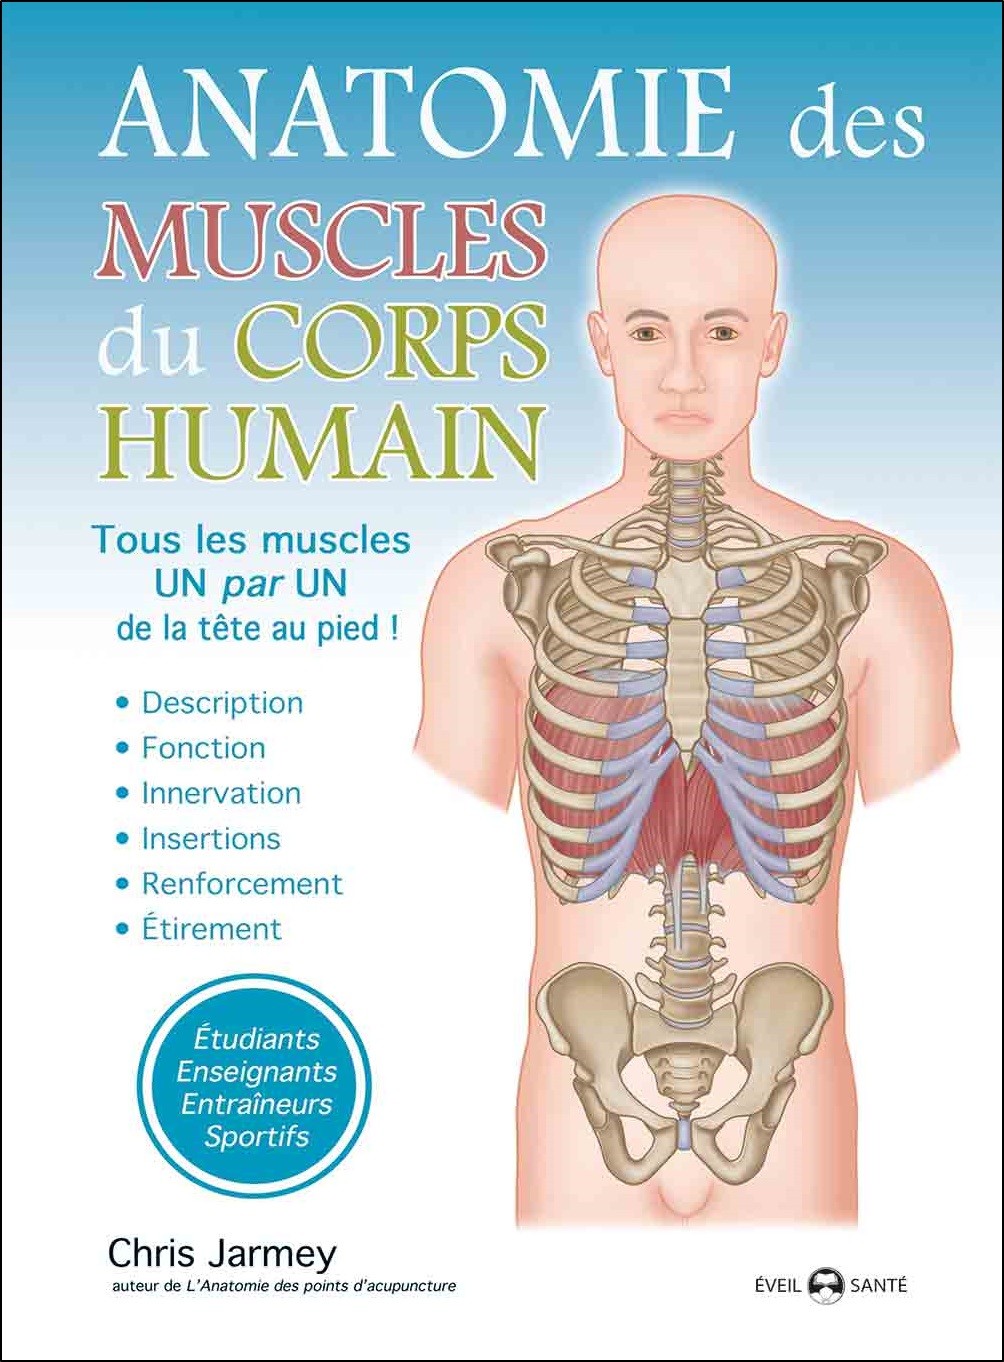 Anatomie musculaire du corps humain